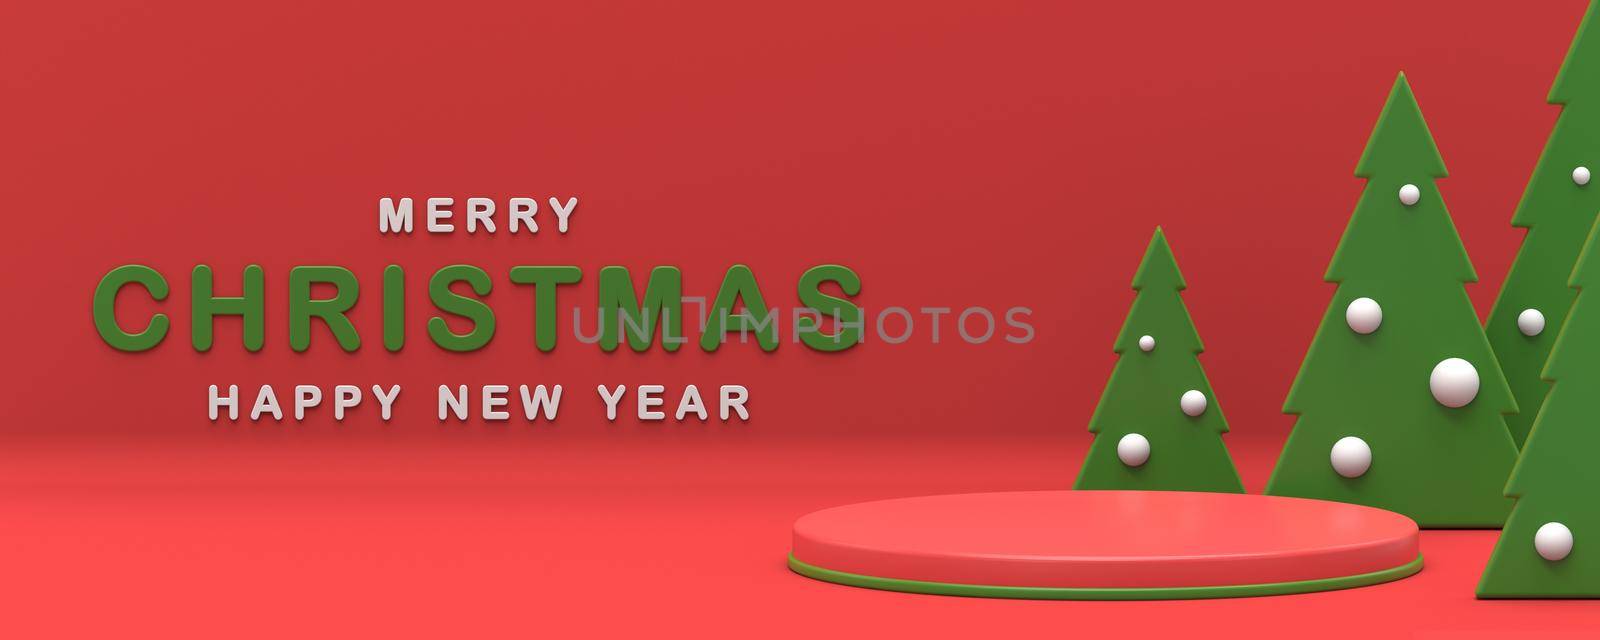 Merry Christmas and Happy New Year 3D rendering illustration isolated on red background